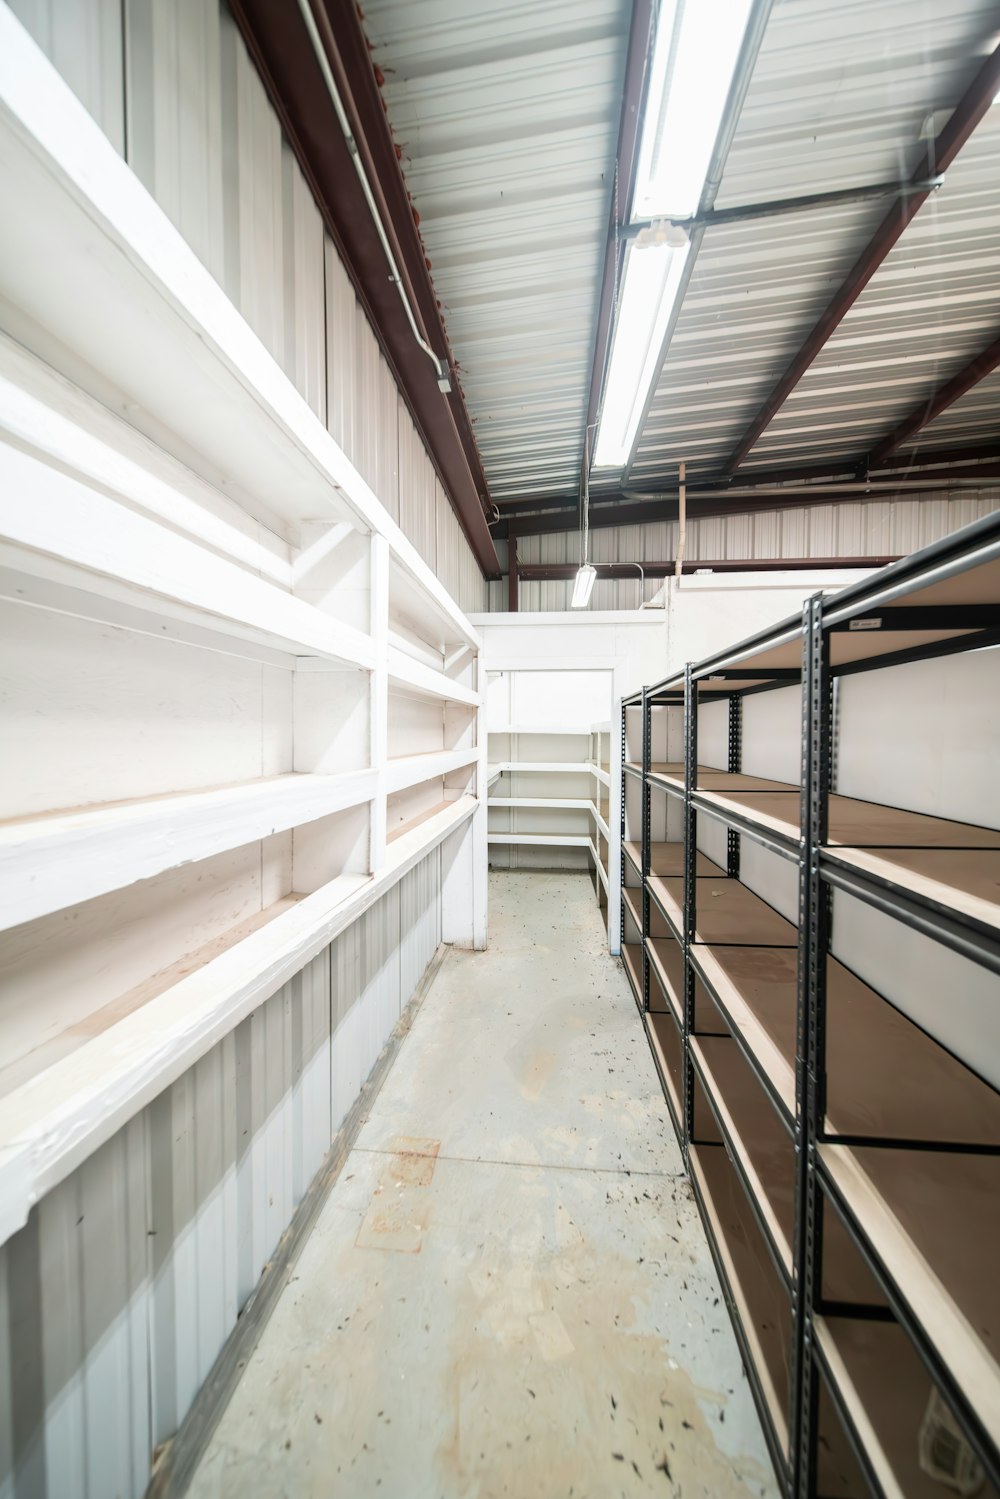 a long row of shelves in a warehouse